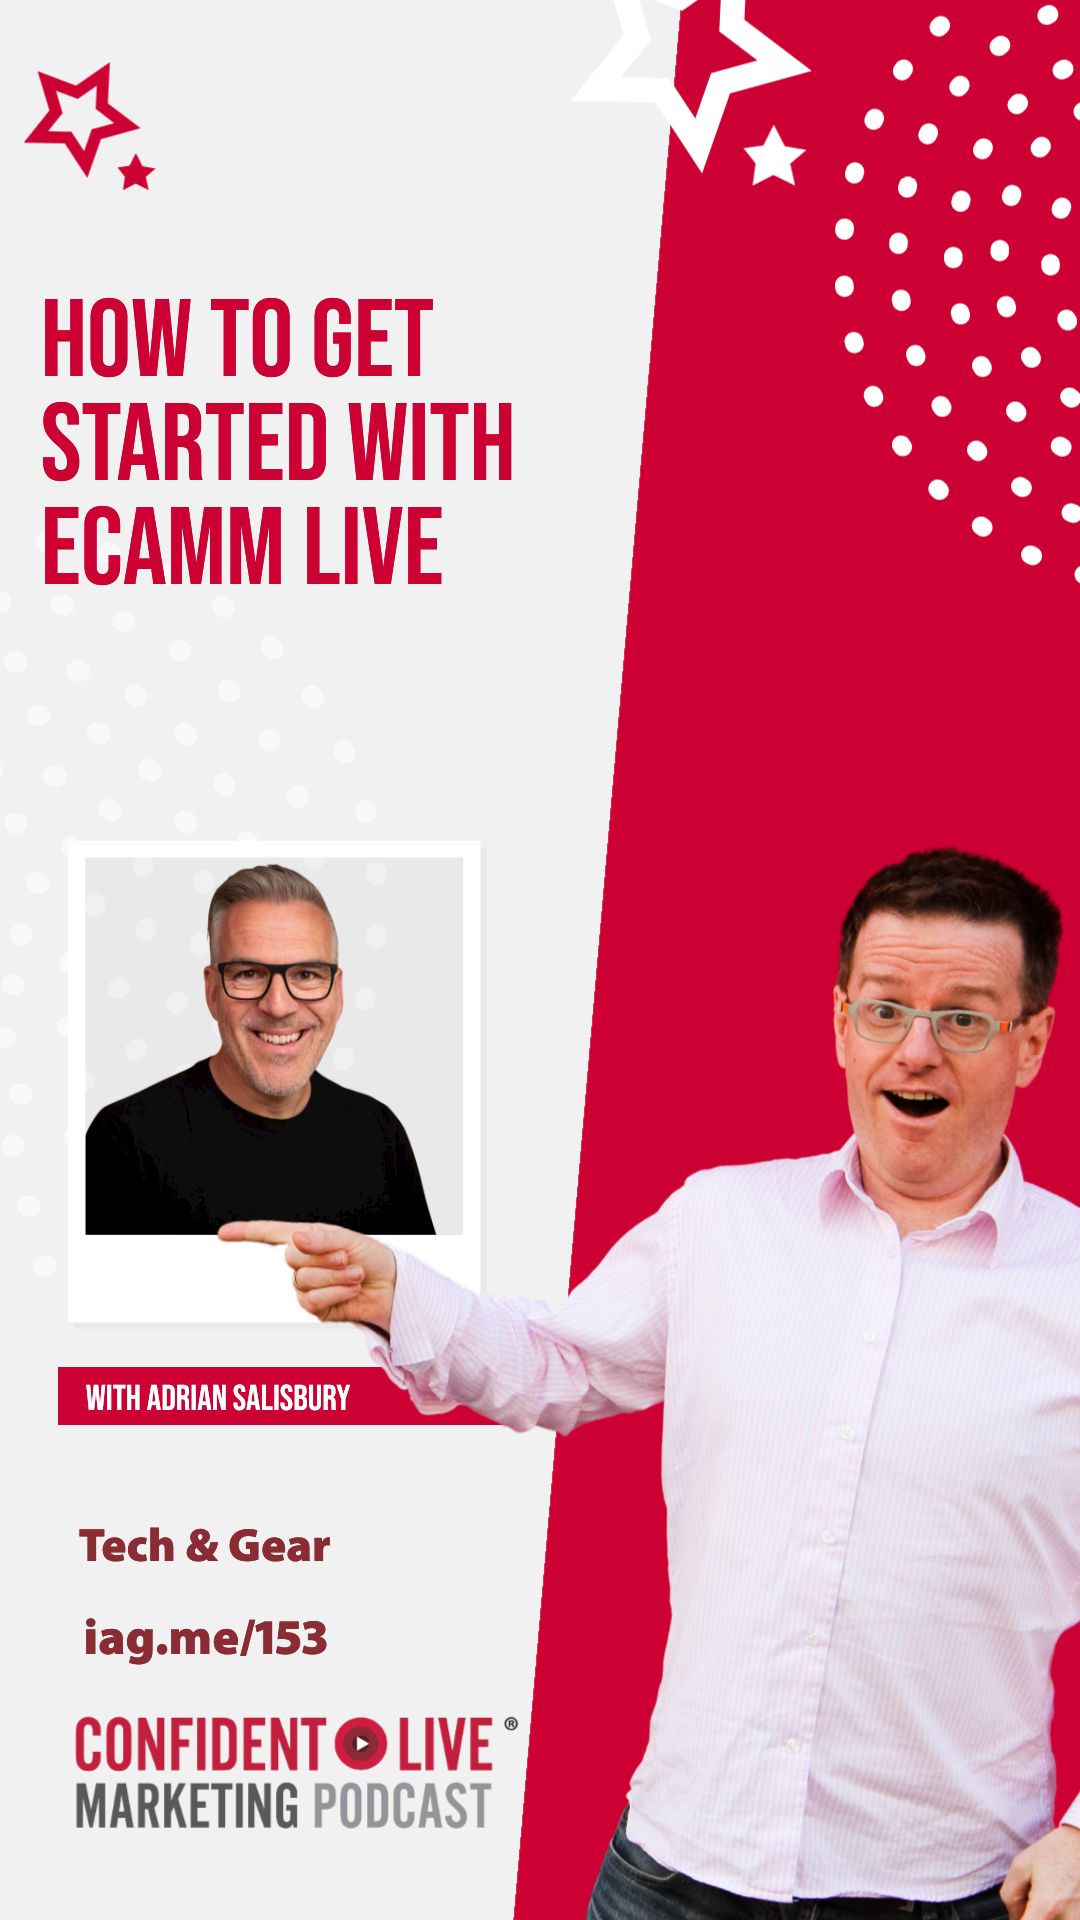 How to Get Started with Ecamm Live